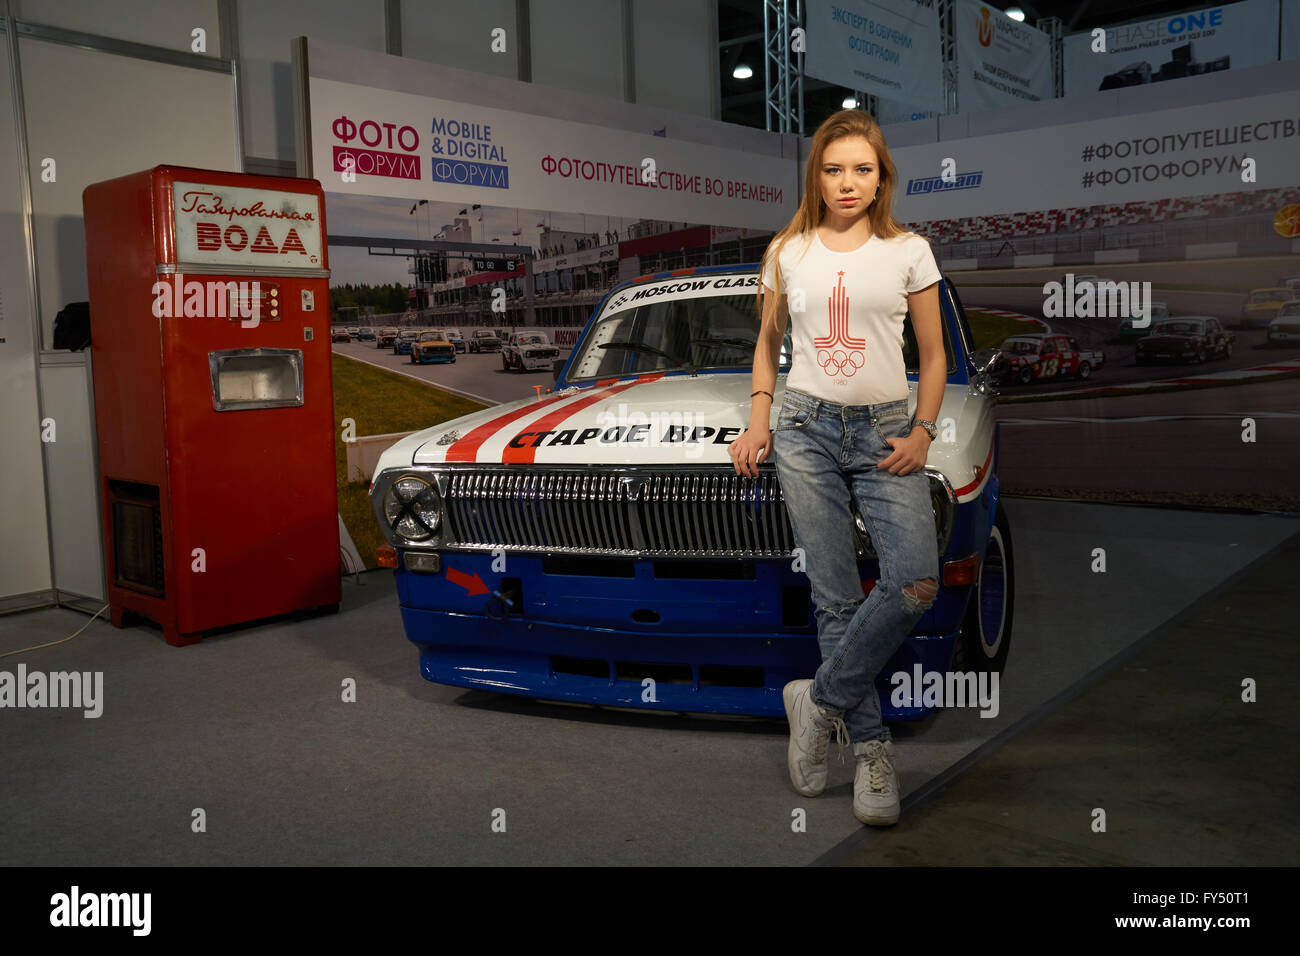 Moscow Crocus Expo, Moscow, Russia - April 15, 2016: Girl stands near old car at Photoforum 2016 Stock Photo